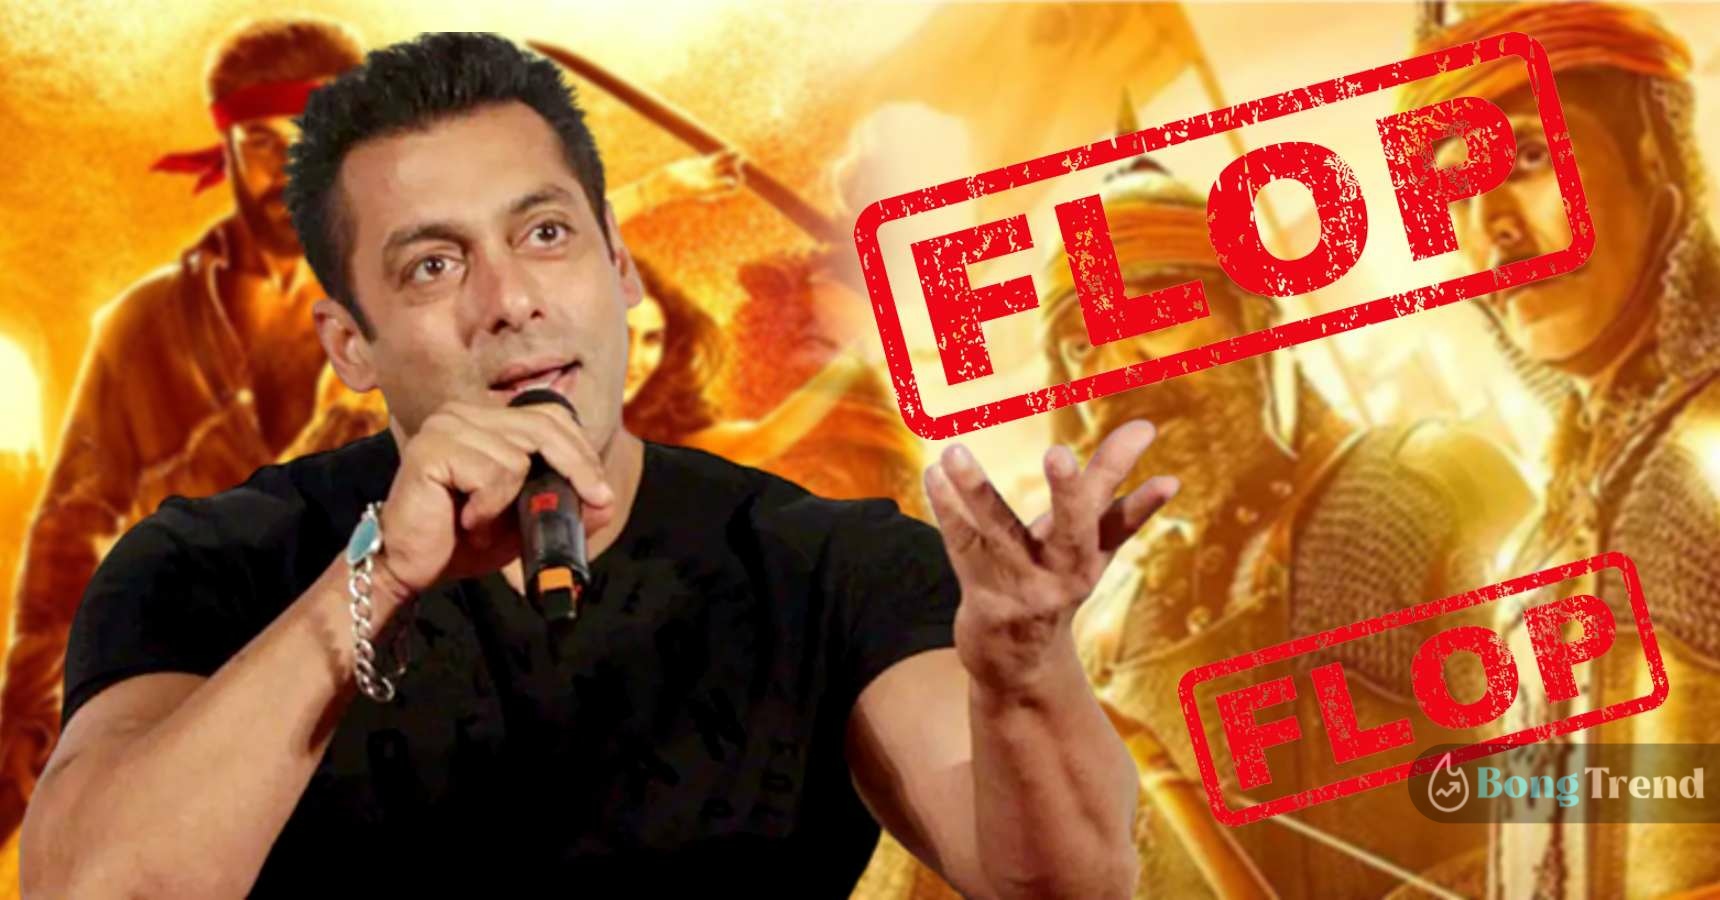 Salman Khan on why bollywood movies are getting flopped